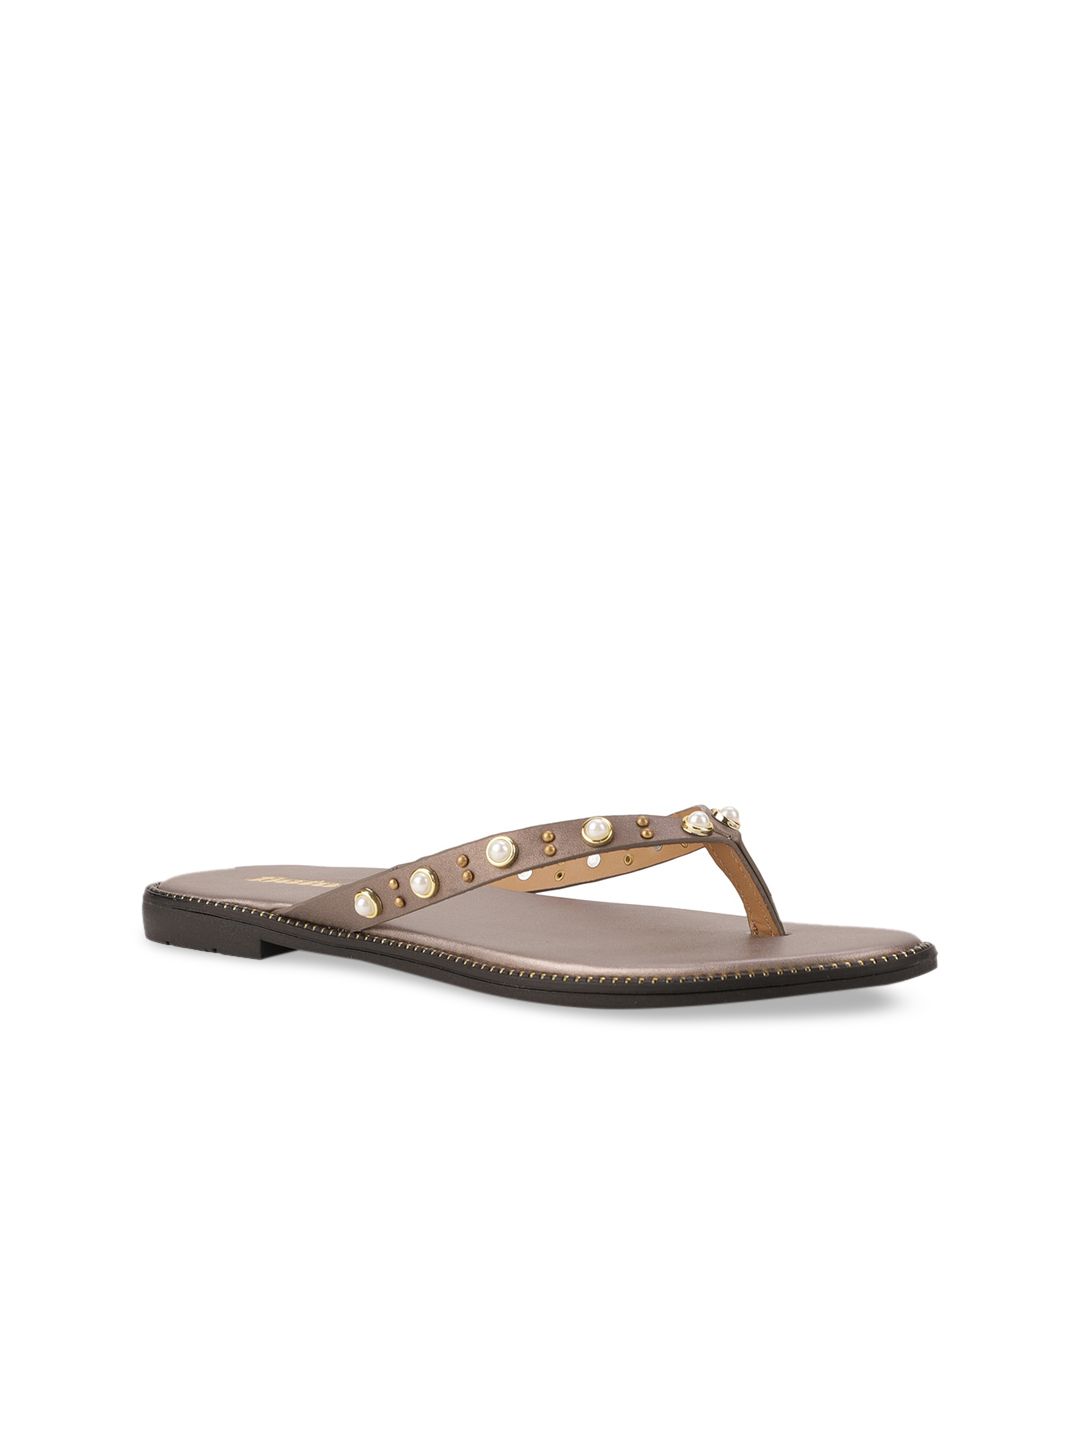 Bata Women Grey Embellished T-Strap Flats Price in India